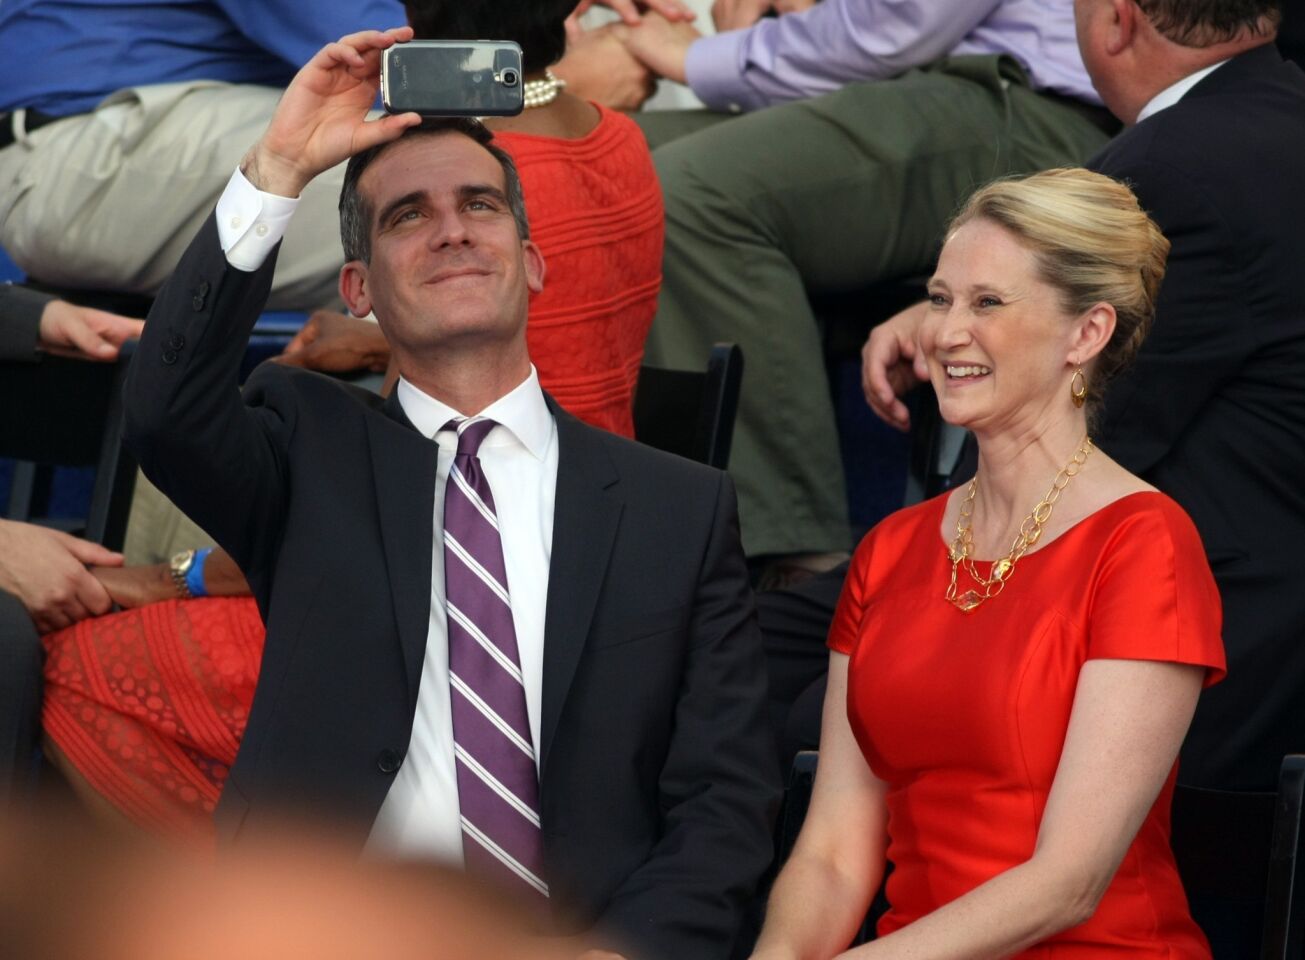 Eric Garcetti shoots video of proceedings seated next to his wife, Amy Wakeland, after being sworn-in.